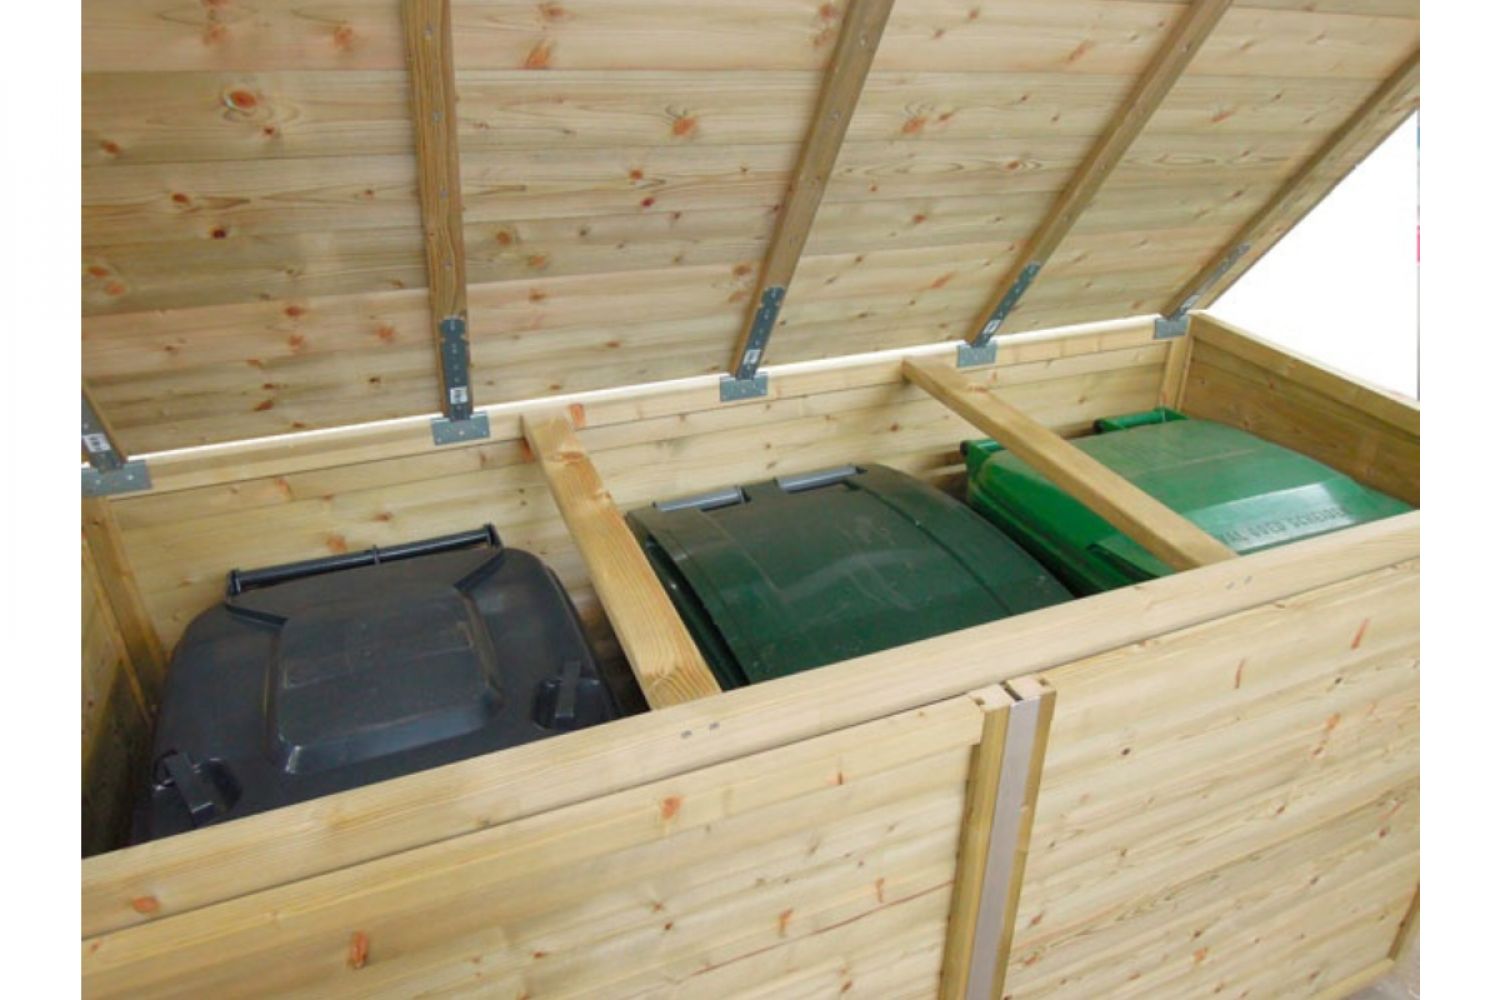 Containerberging 2x 140L en 1x 240L | 187x90x125 cm - voor 3 containers!